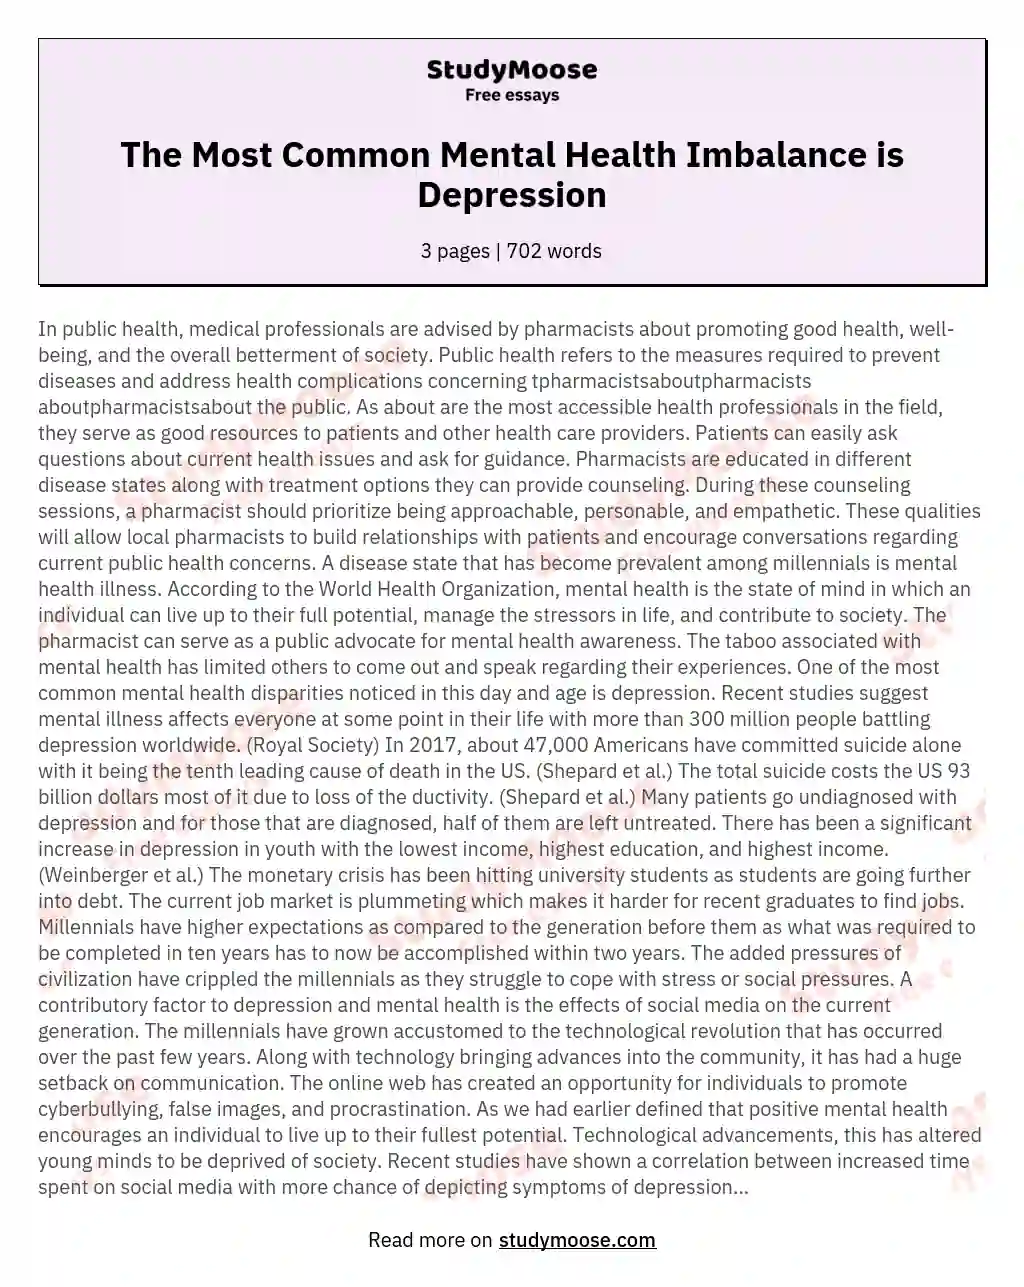 The Most Common Mental Health Imbalance is Depression essay